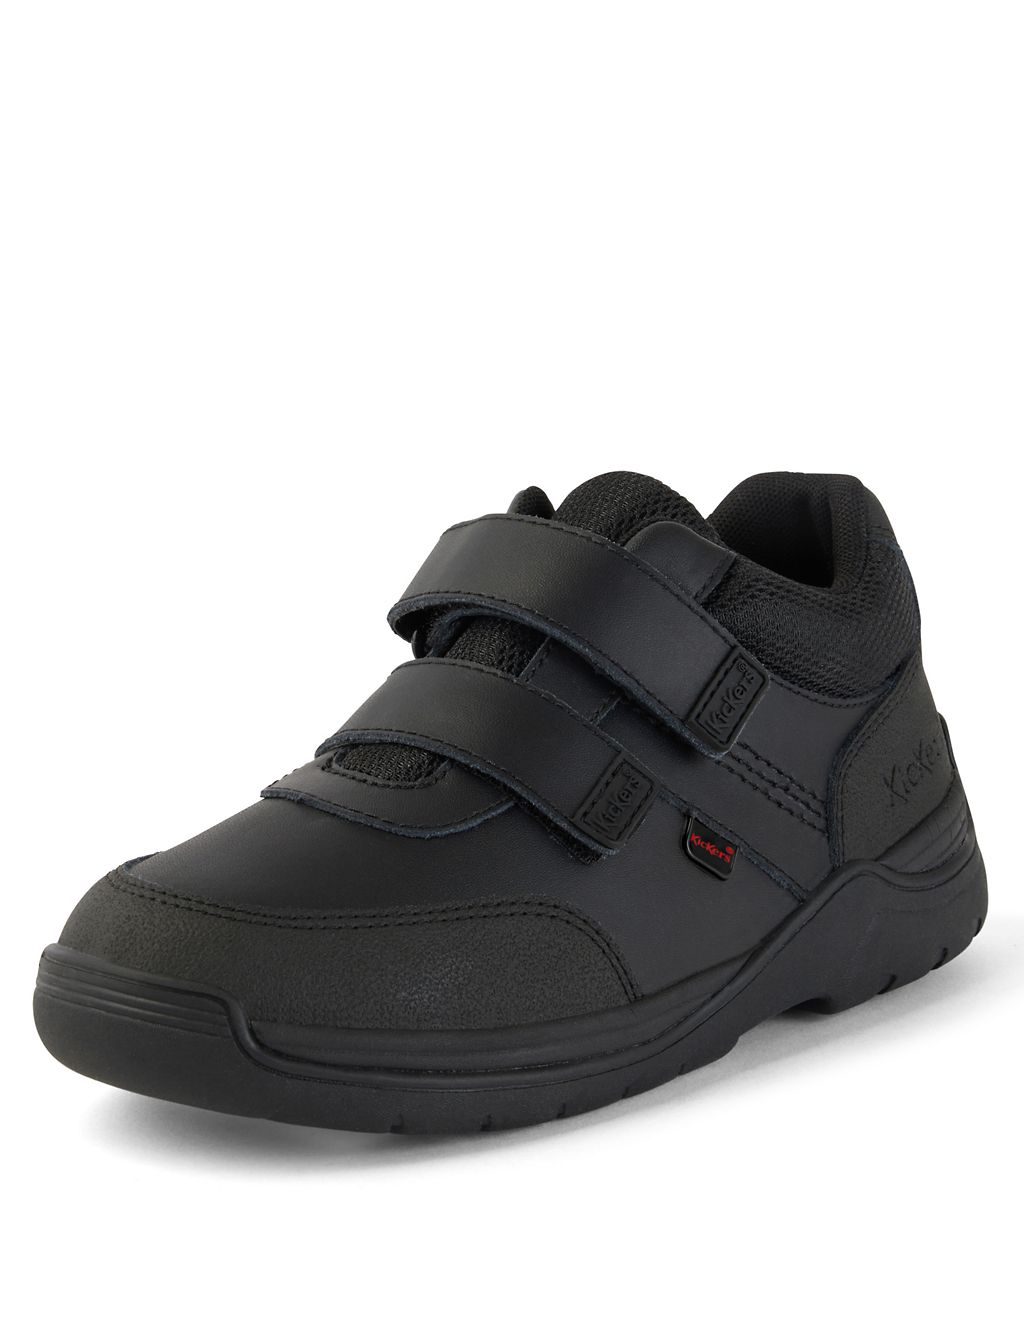 Kids' Leather Riptape School Shoes 6 of 6